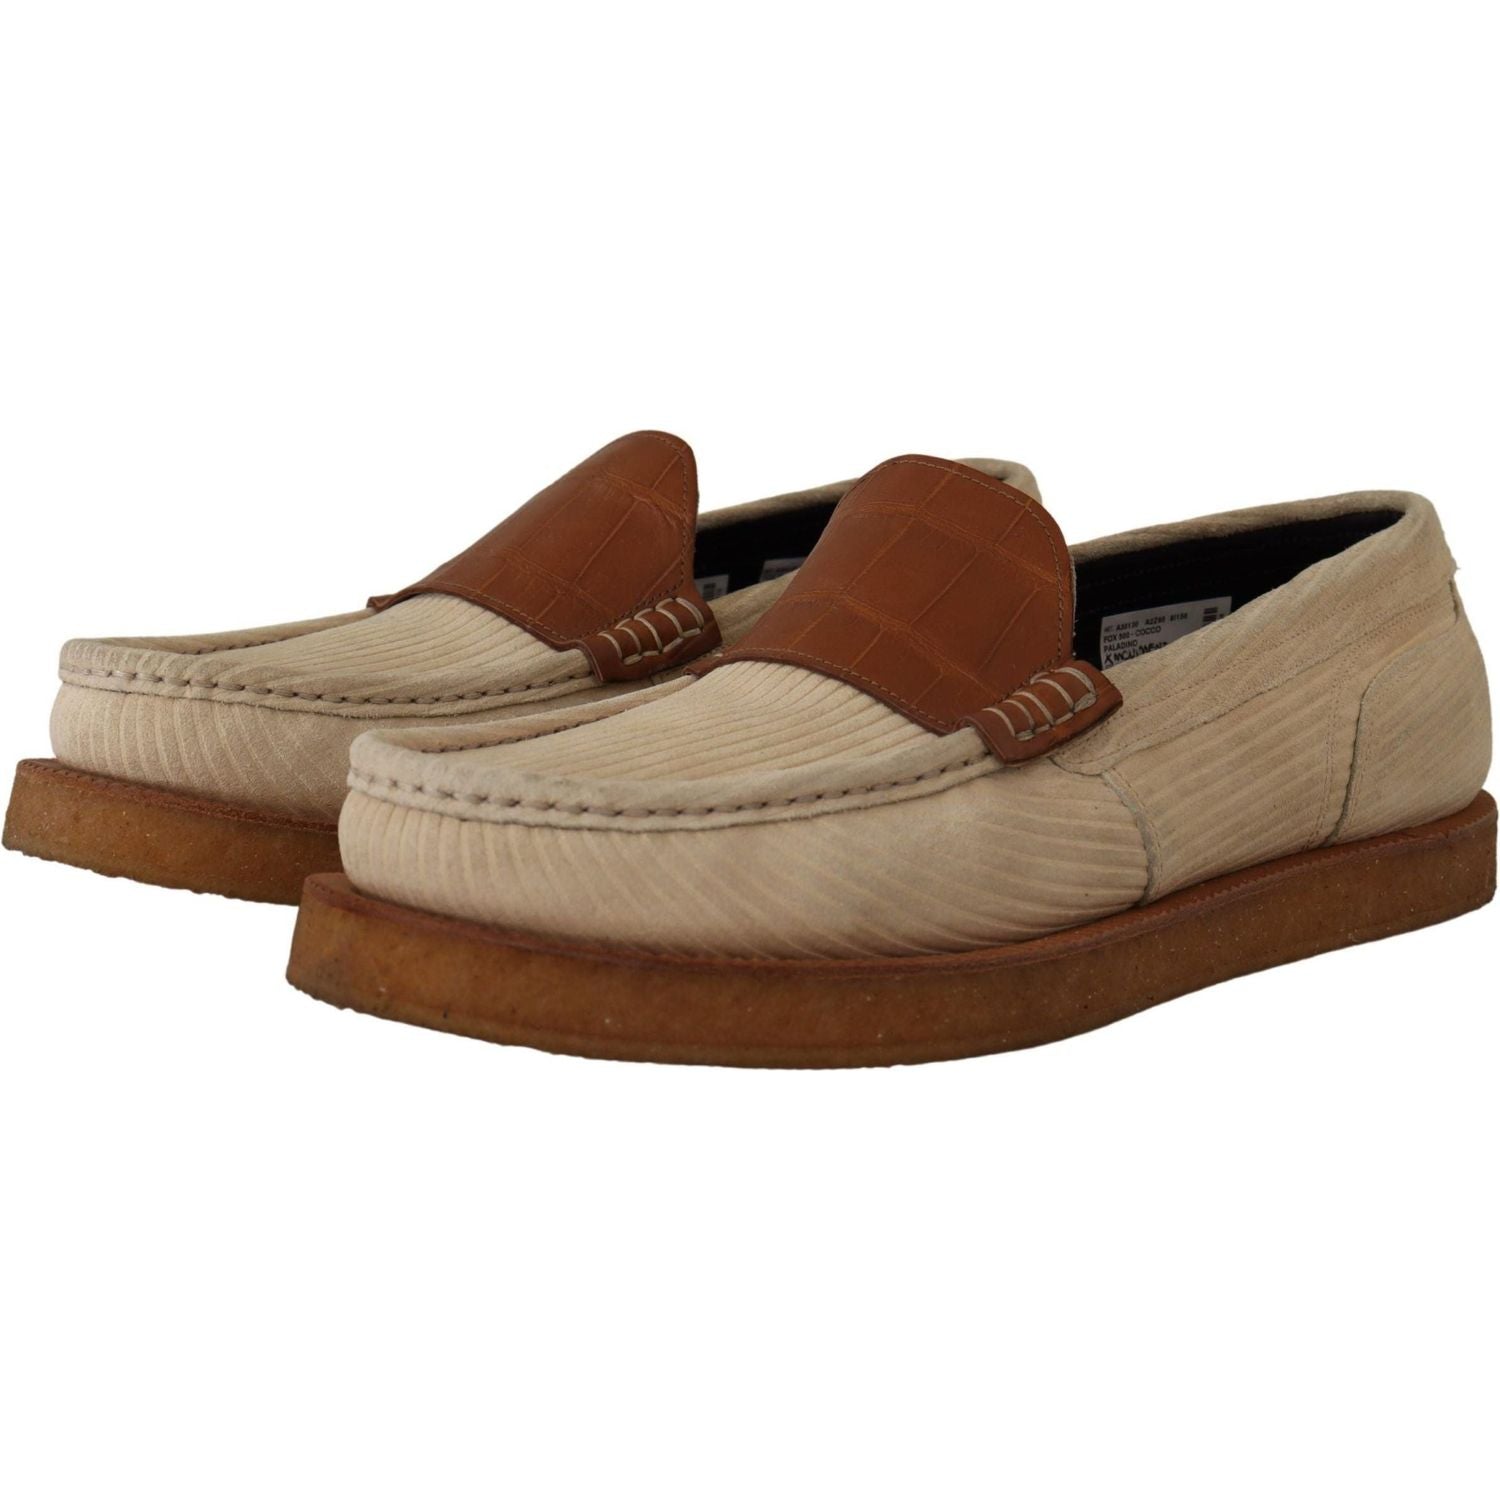 Dolce & Gabbana | White Brown Fox Moccasins Loafers Shoes | McRichard Designer Brands